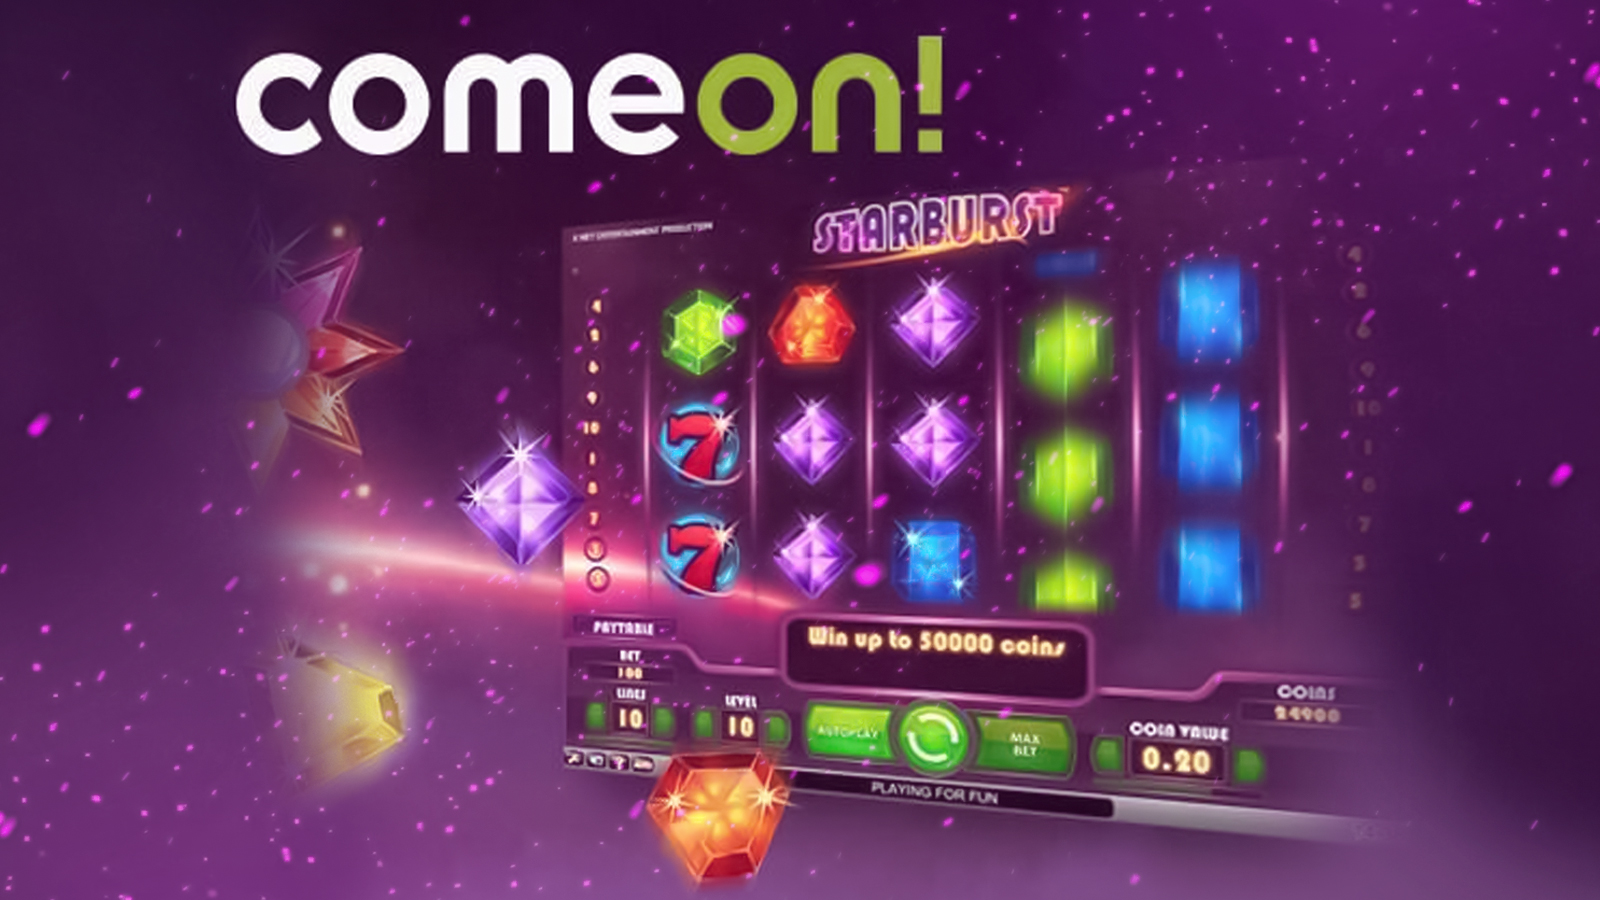 Play the most exciting slots at Comeon casino.